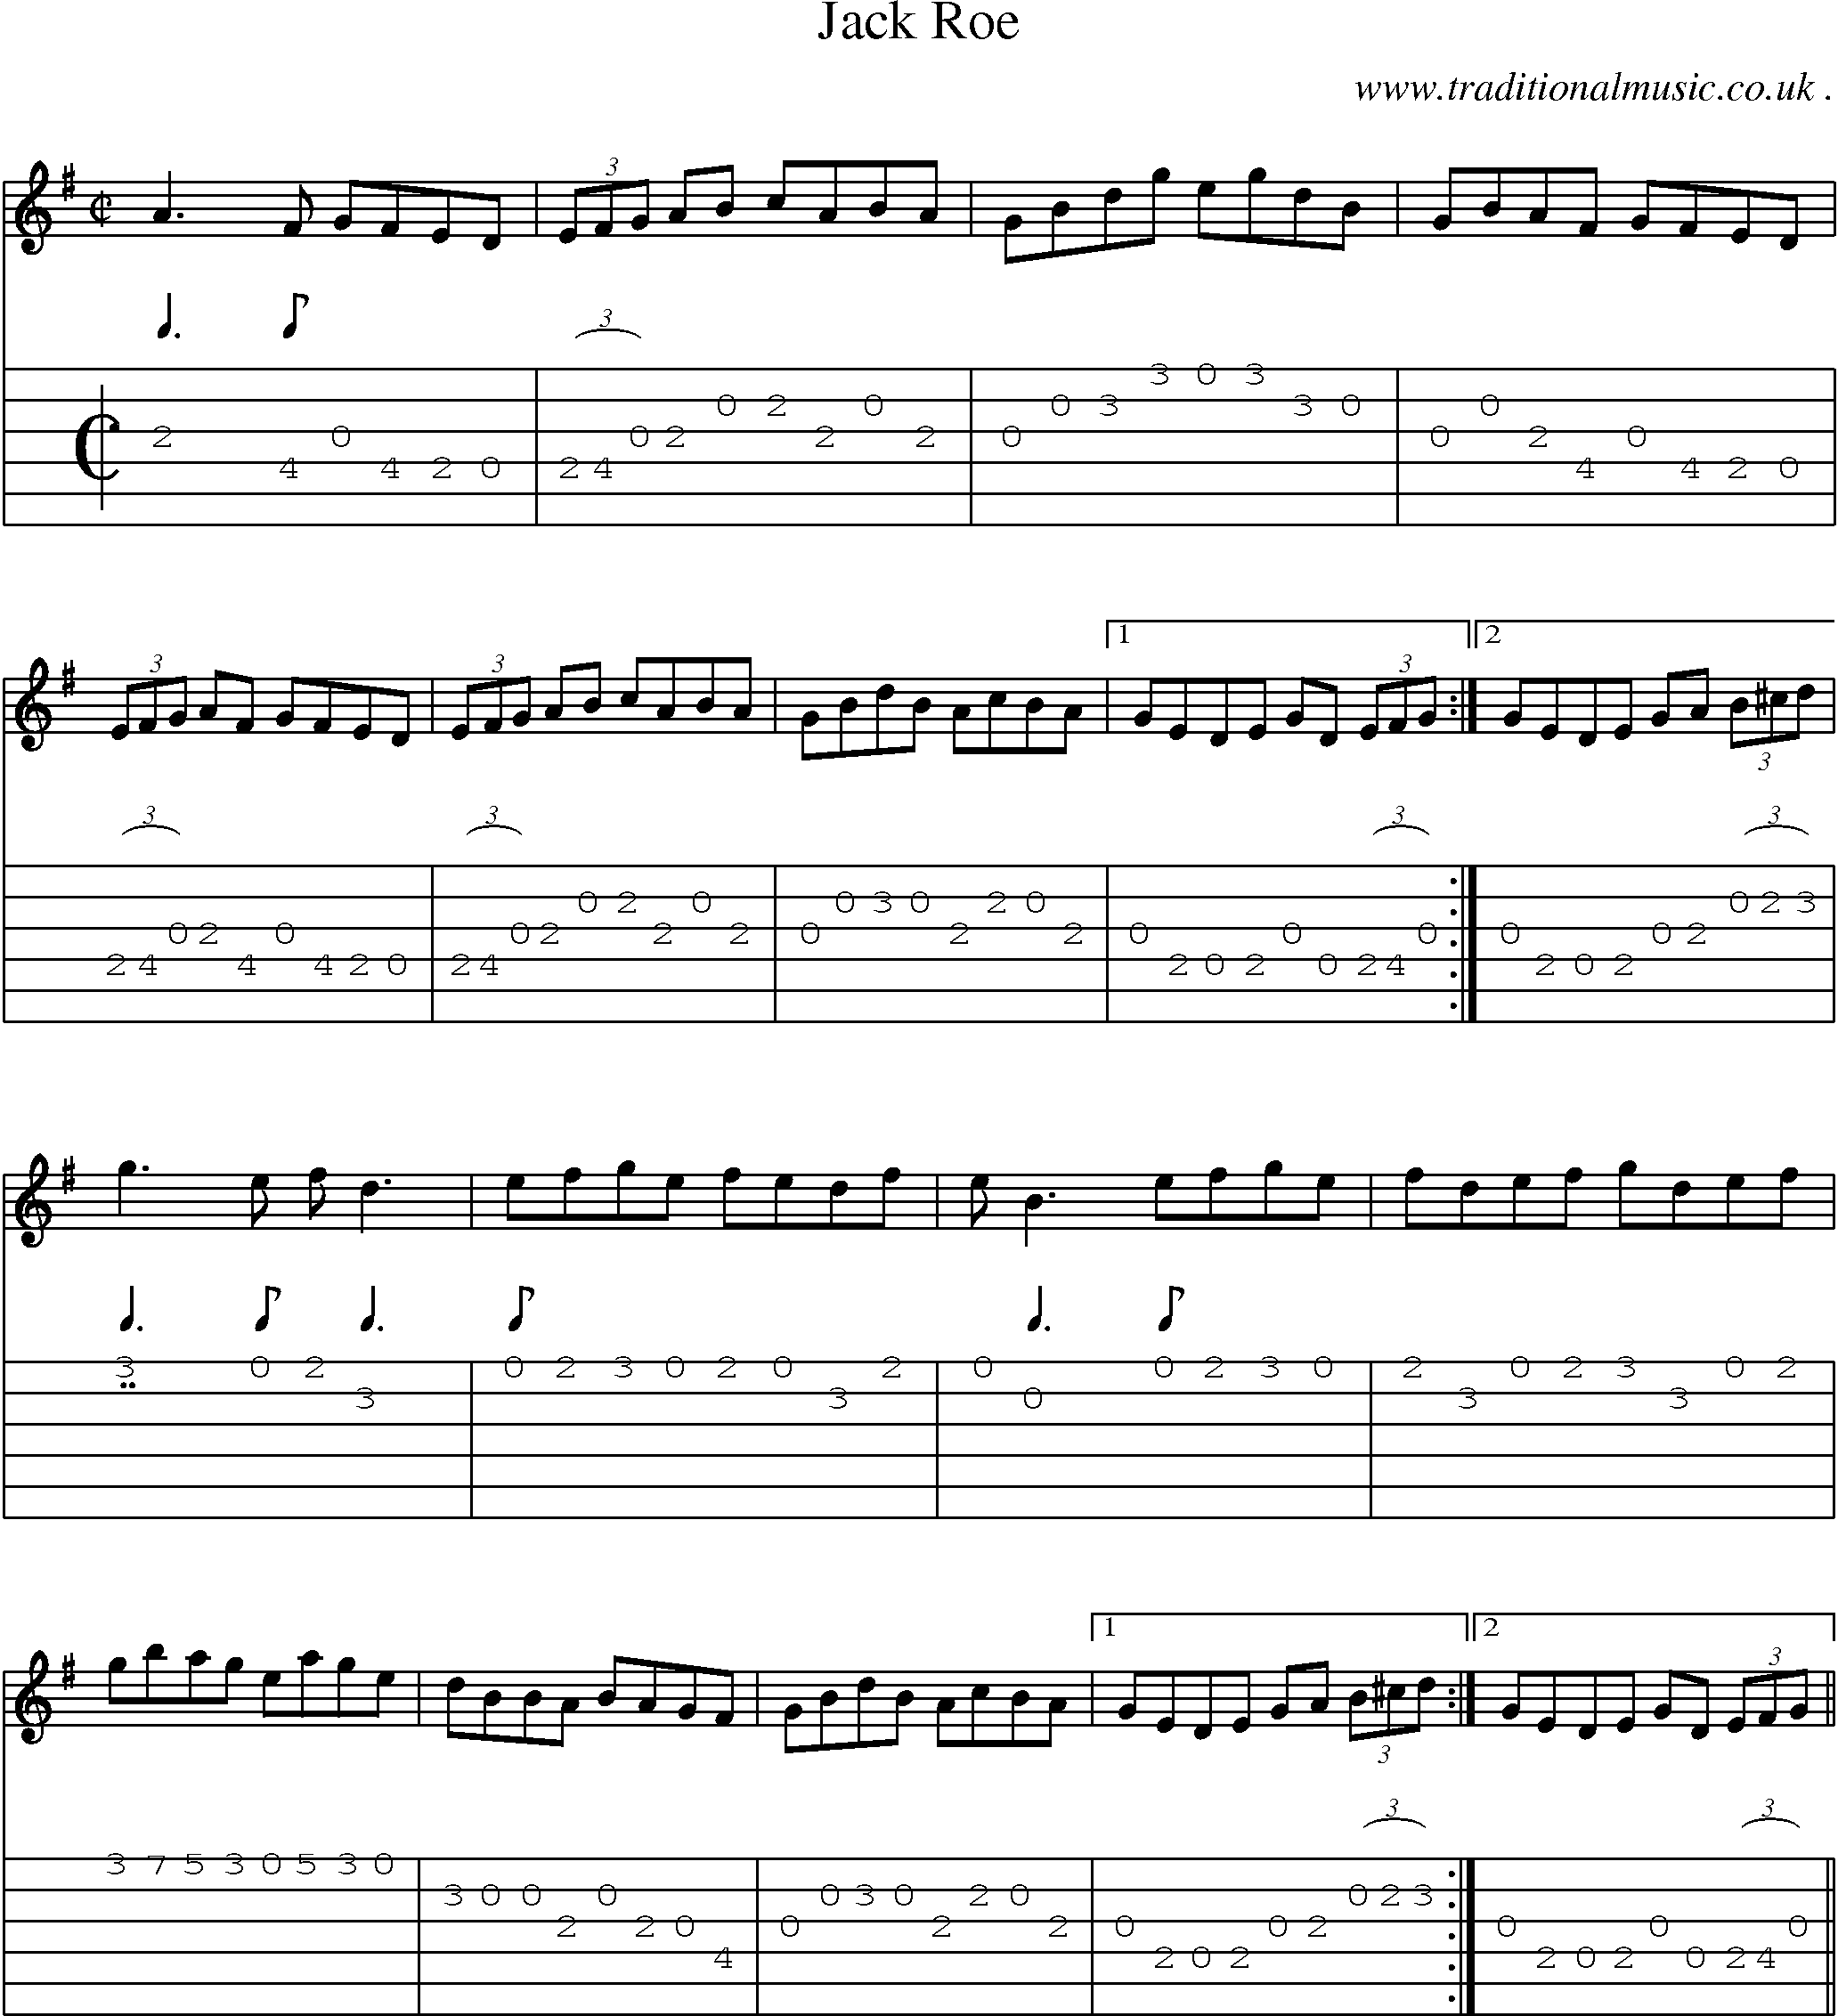 Sheet-Music and Guitar Tabs for Jack Roe